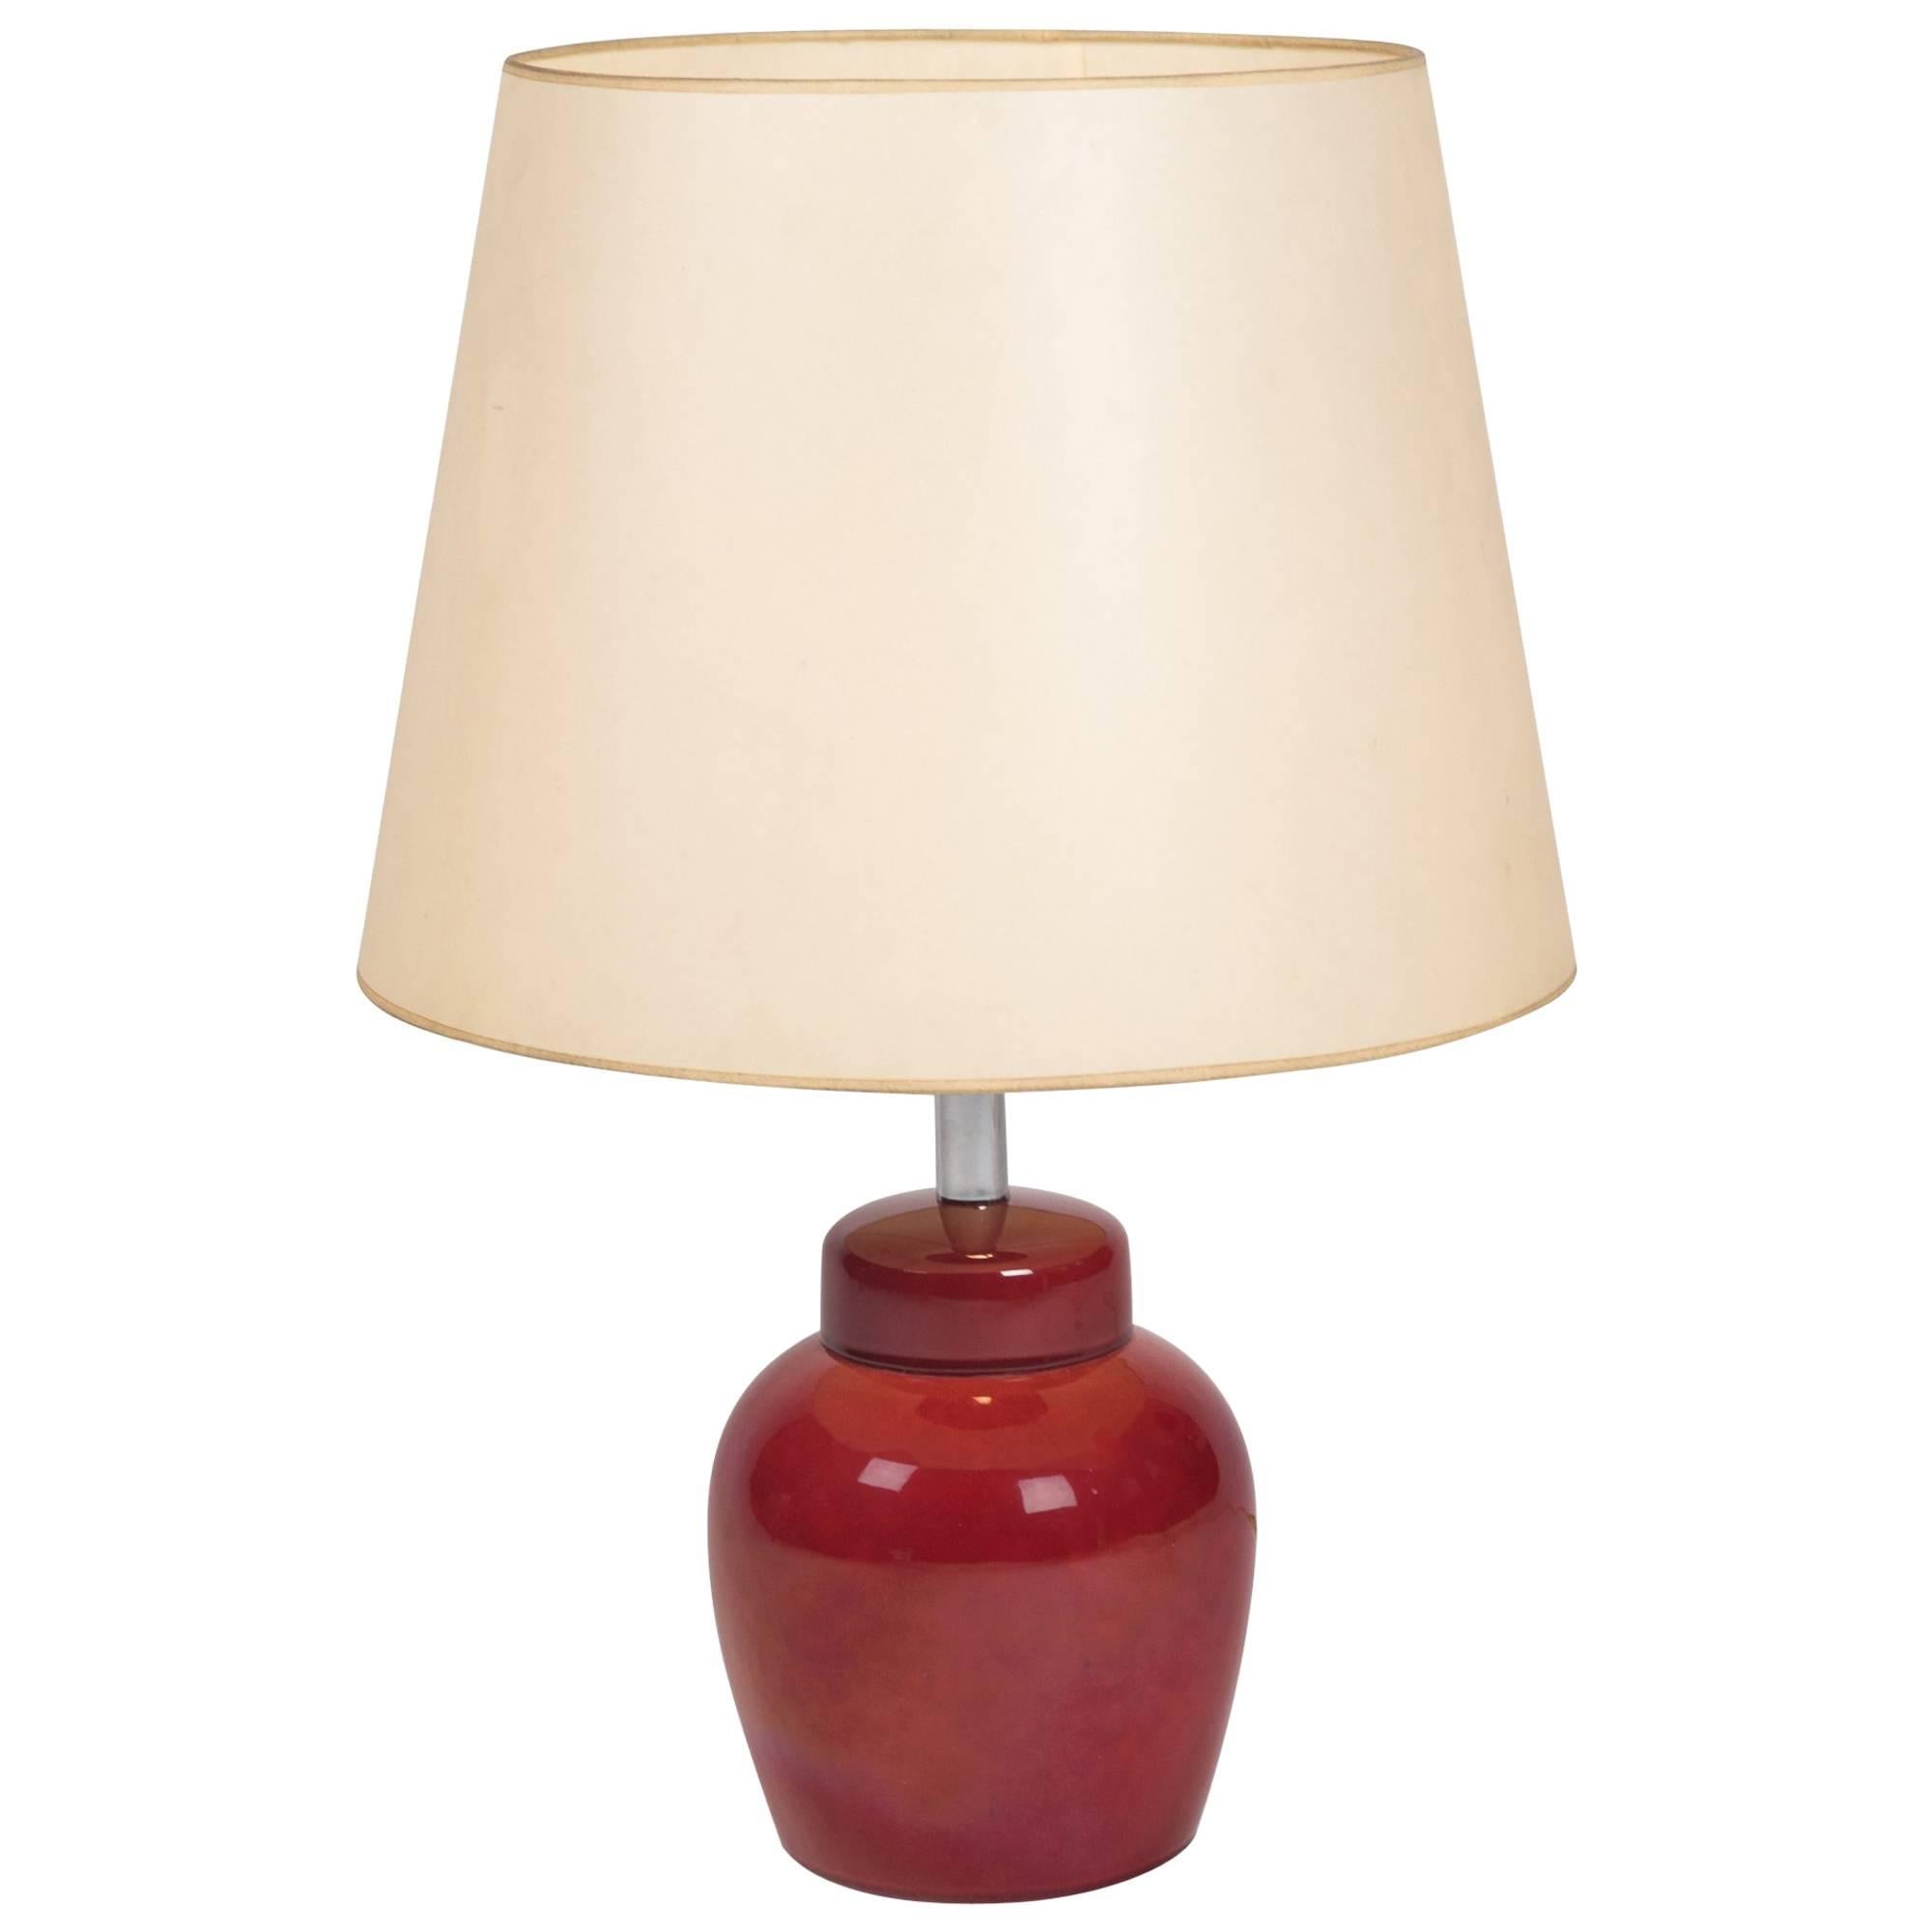 Red Glazed Ceramic Table Lamp by Paul Millet for Sevres For Sale